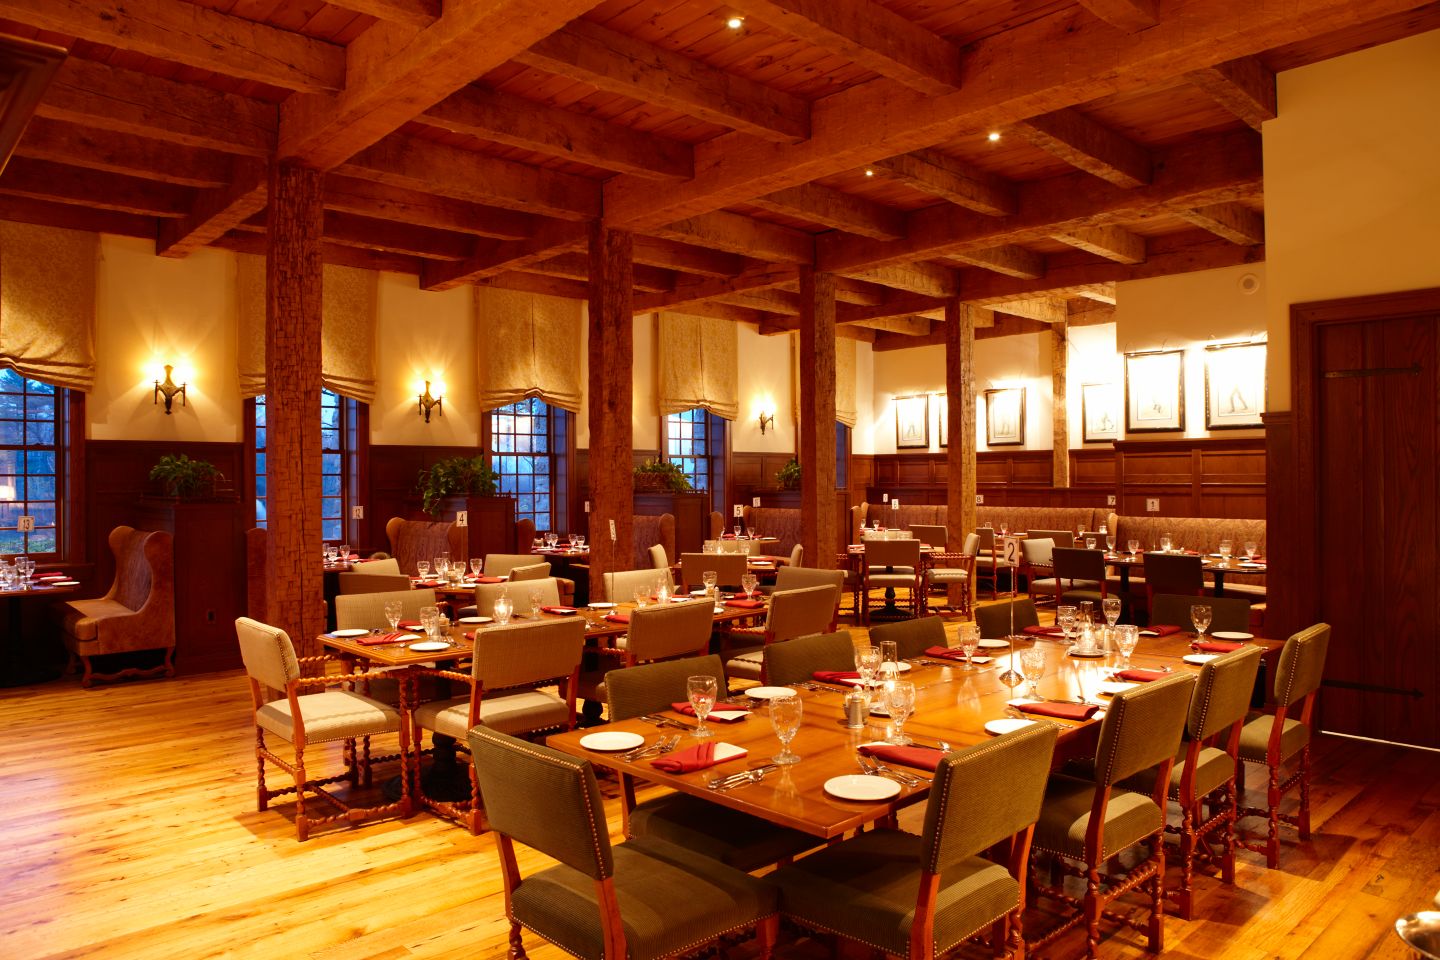 the interior of Whistling Straits Restaurant with dinner tables set